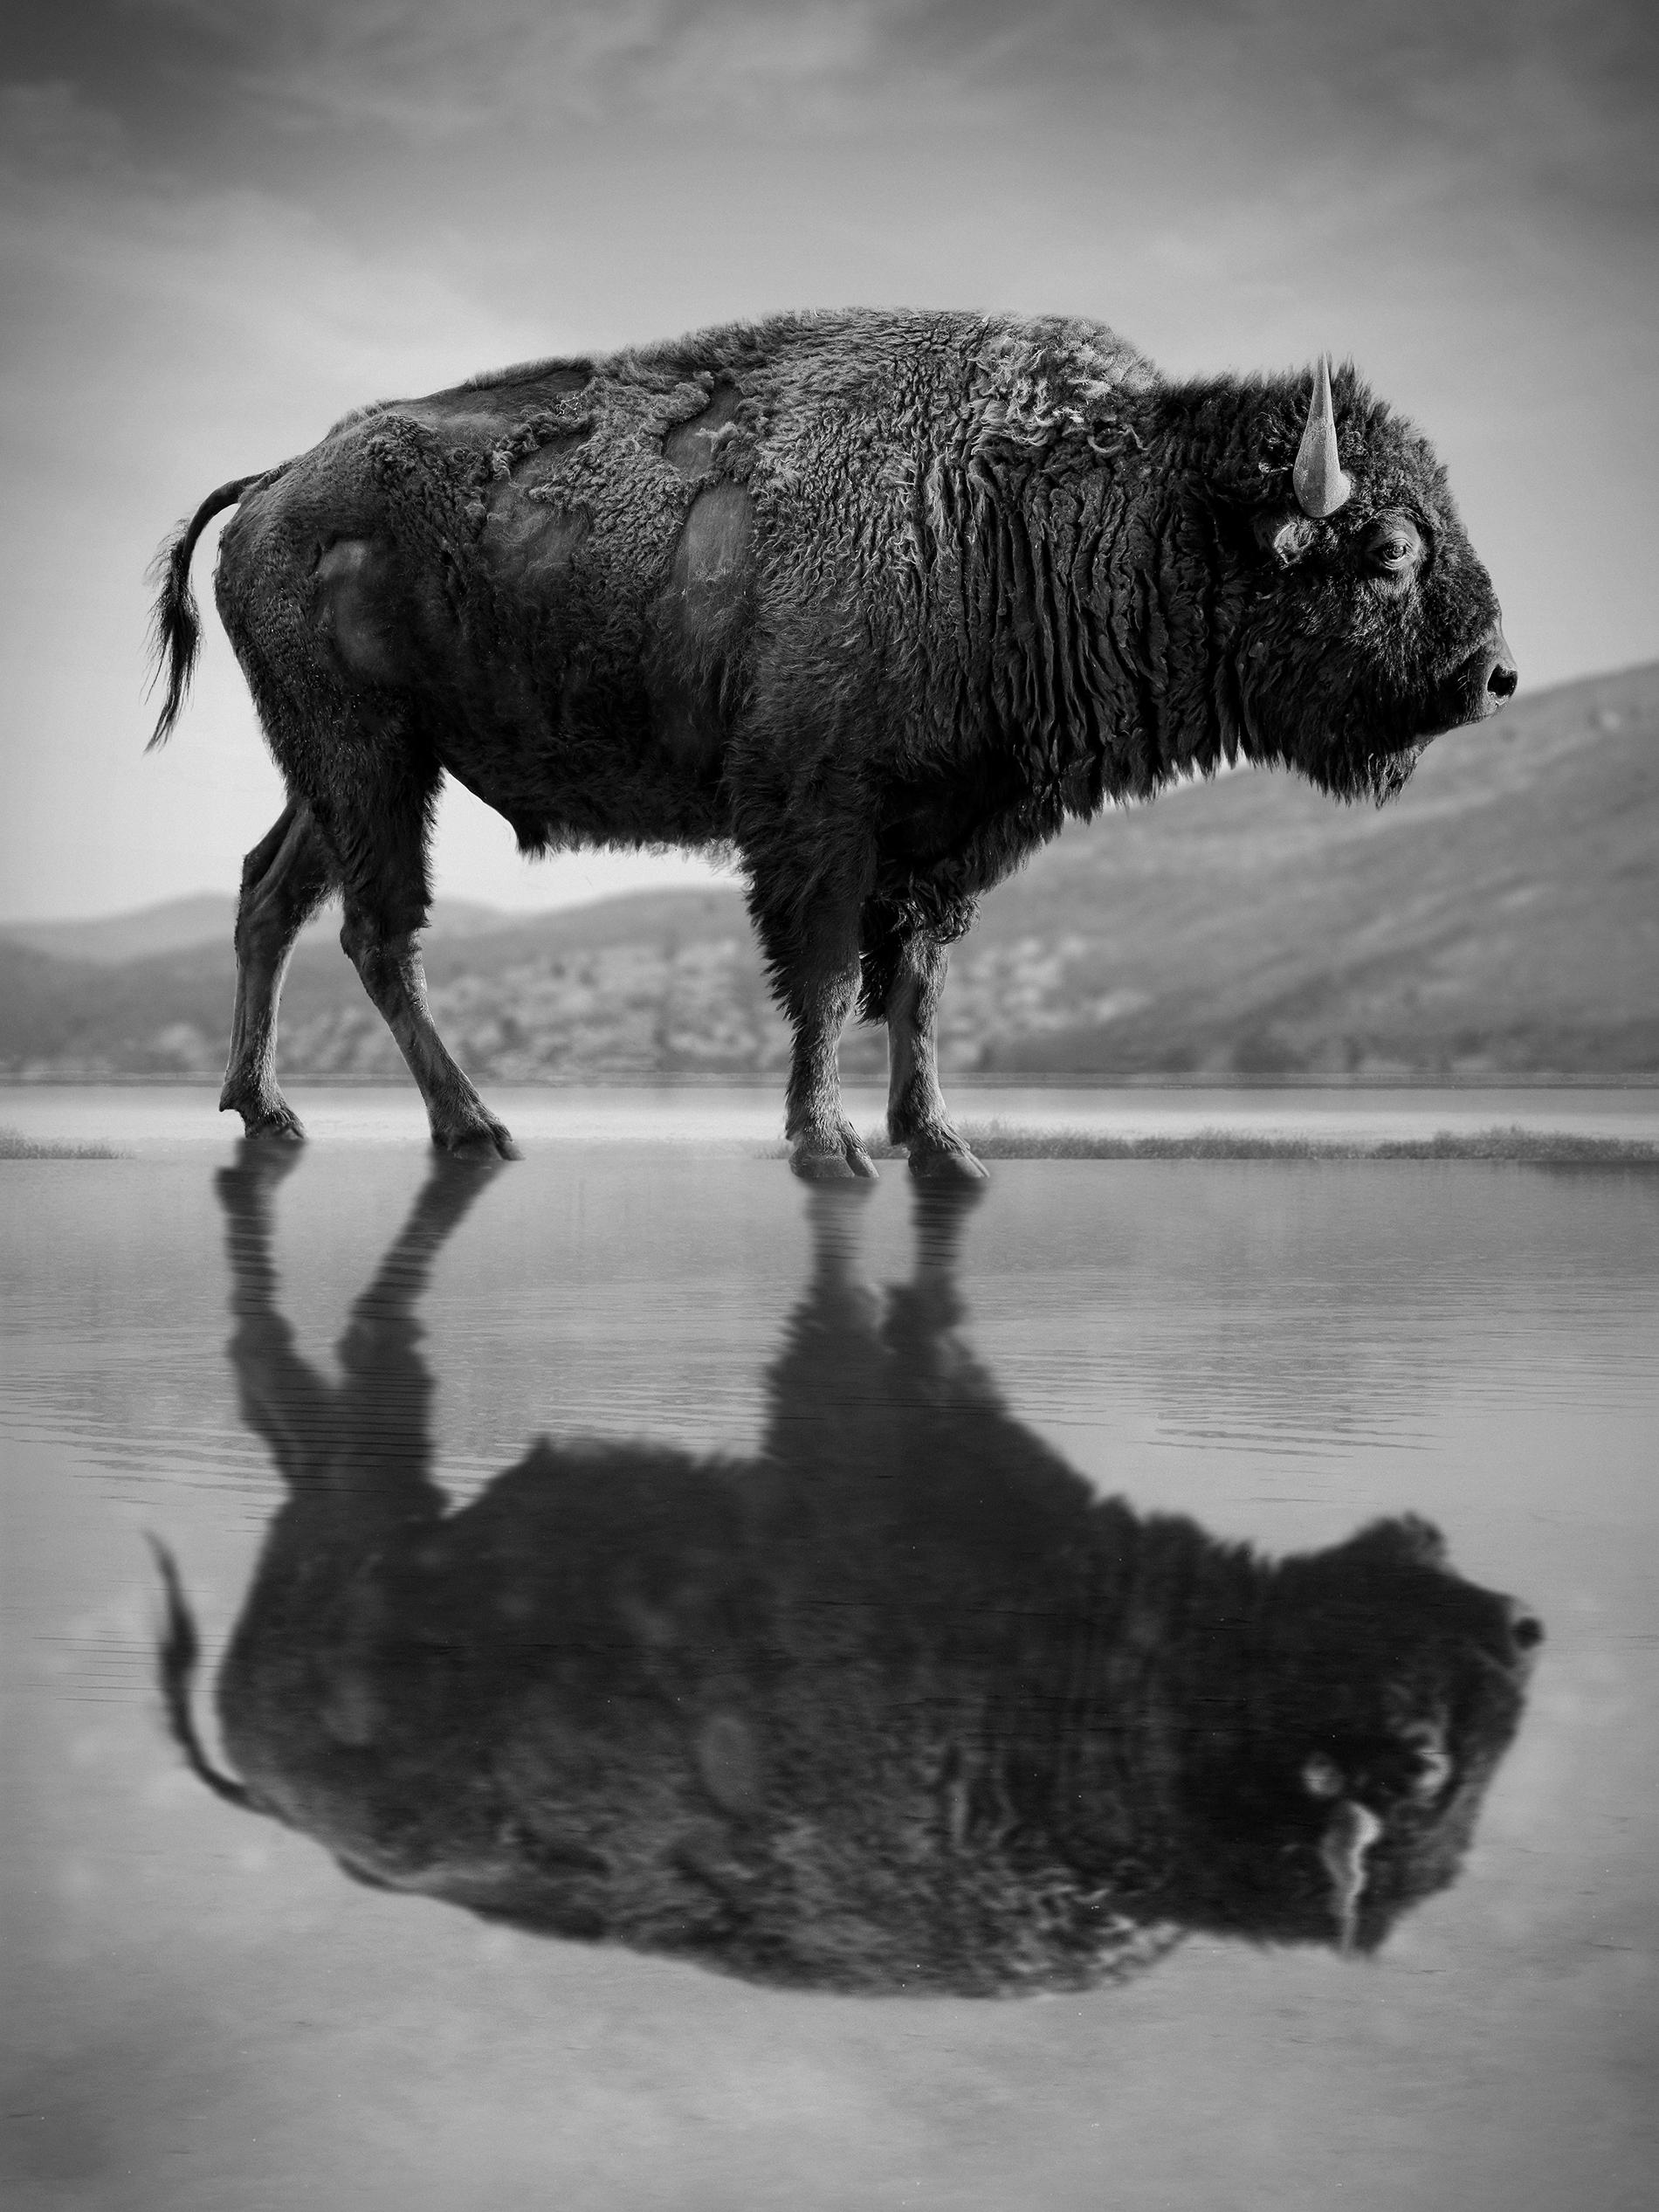 Shane Russeck Black and White Photograph - "Old World" 48x36 Black & White Photography Bison Buffalo Signed AP Photograph